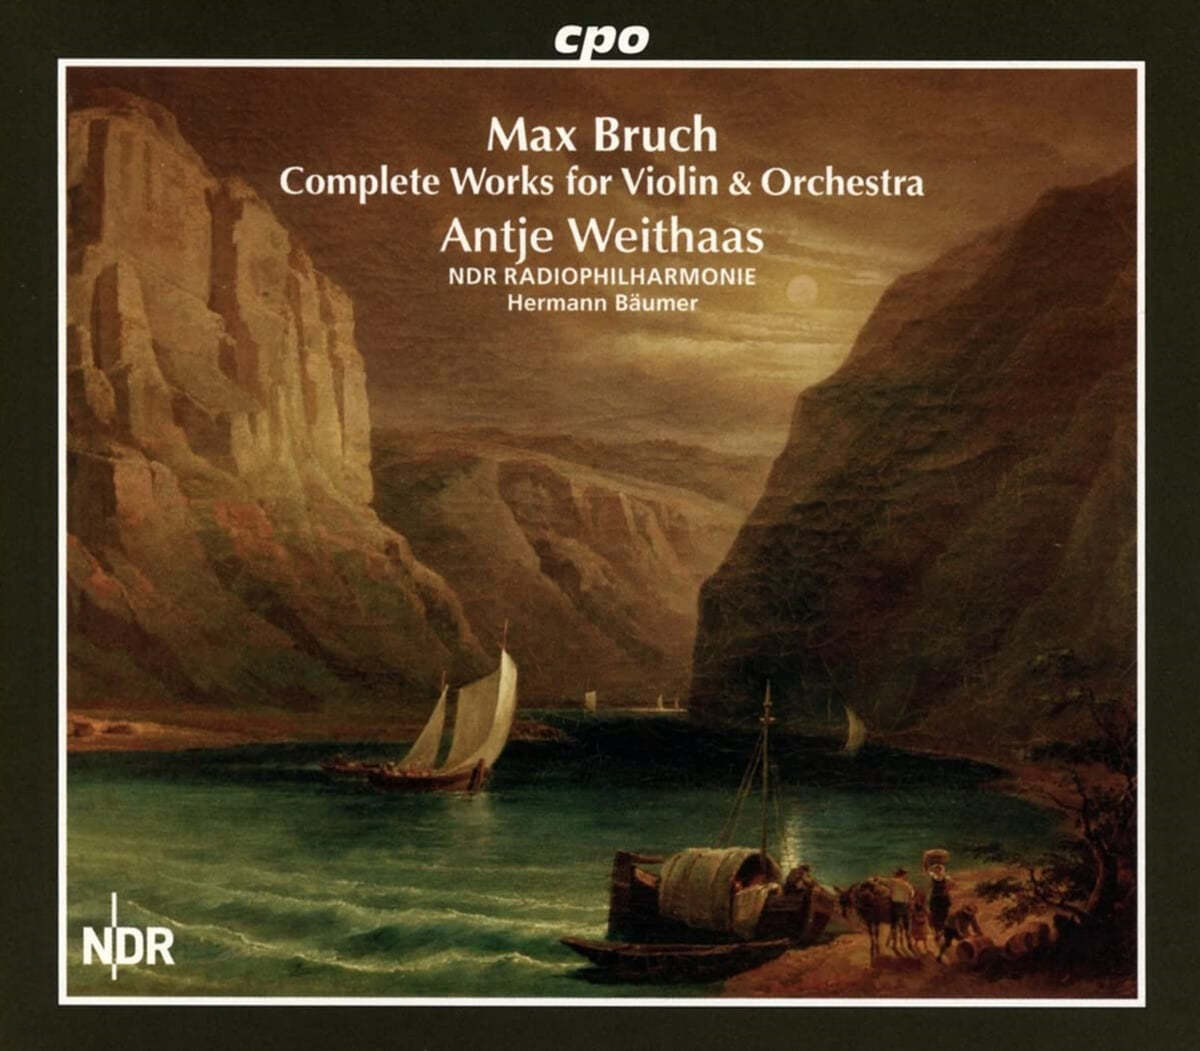 Antje Weithaas 브루흐: 바이올린과 오케스트라를 위한 작품 전곡 (Bruch: Complete Works for Violin & Orchestra)